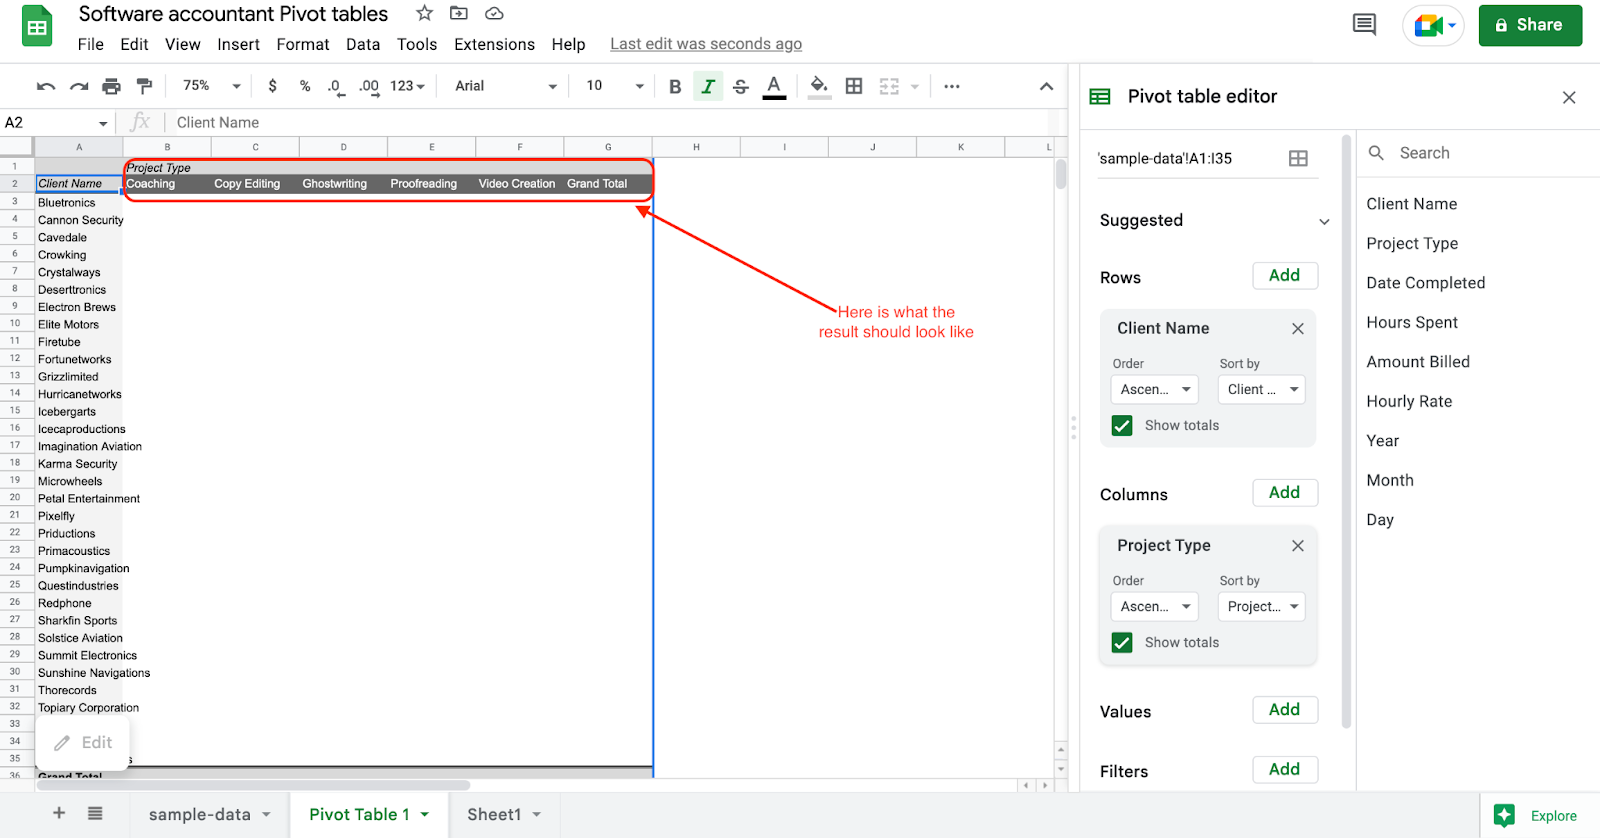 adding columns to pivot tables in Google sheets